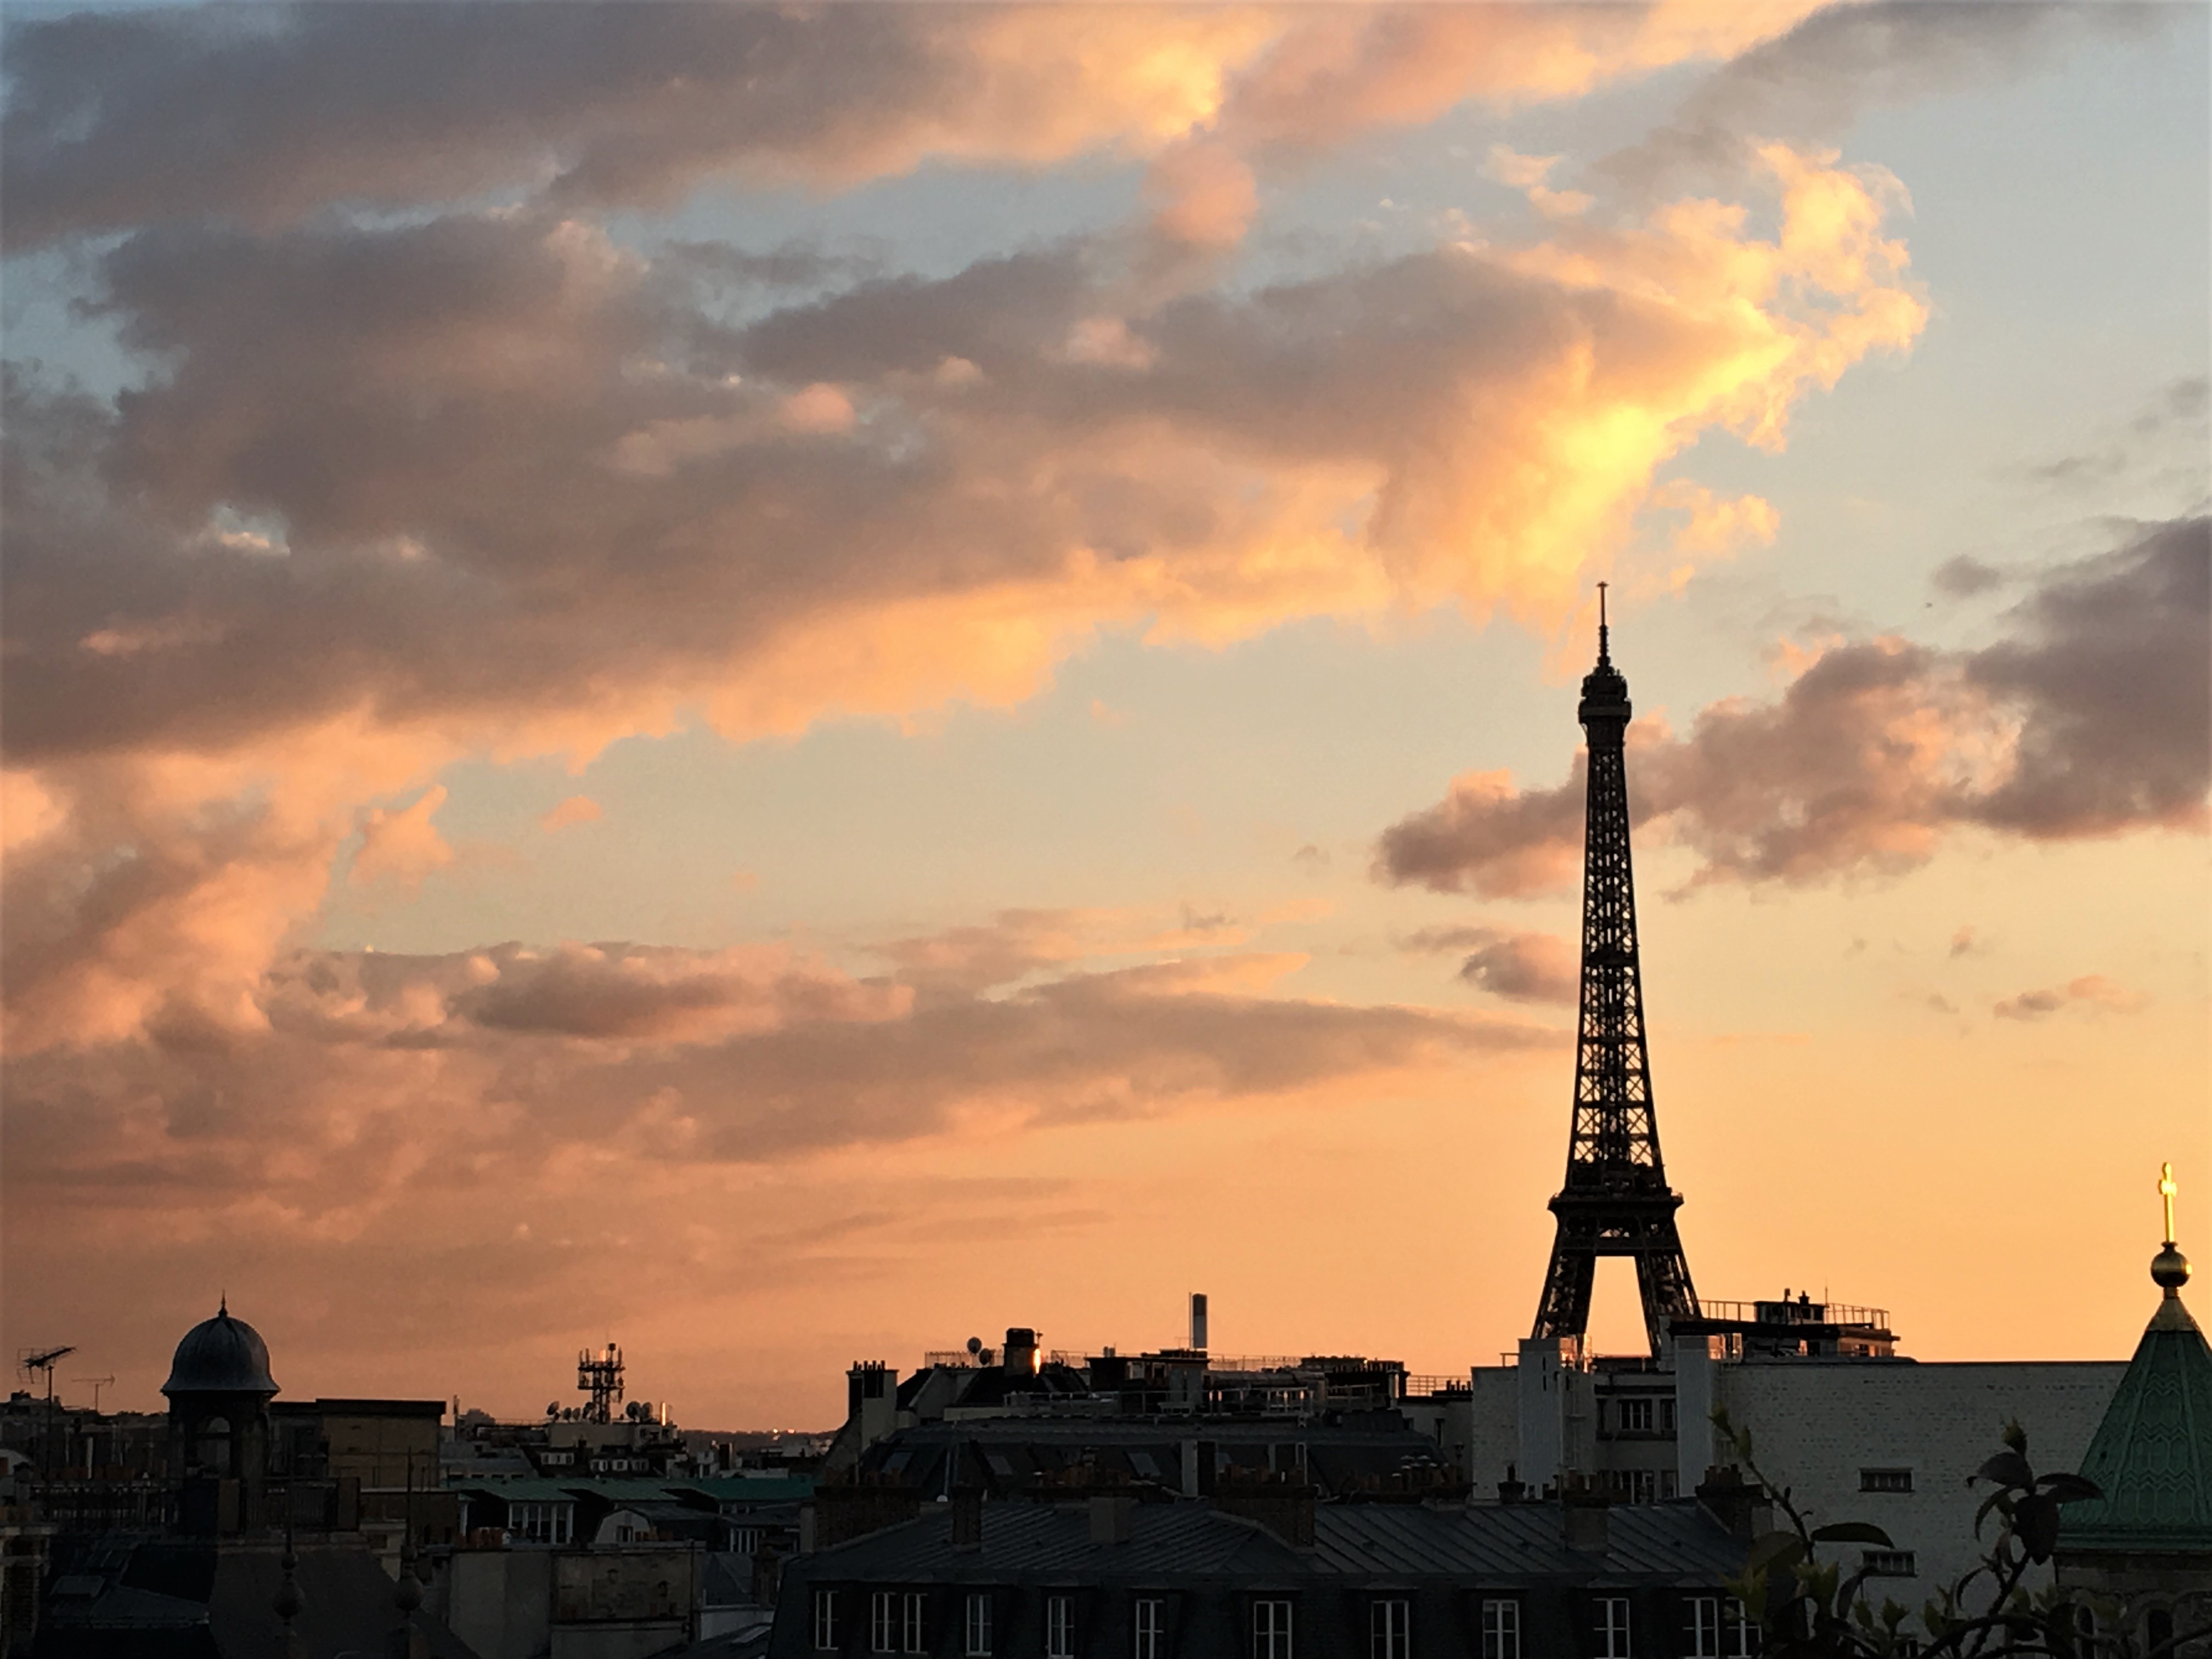 sunset view with Eiffel tower